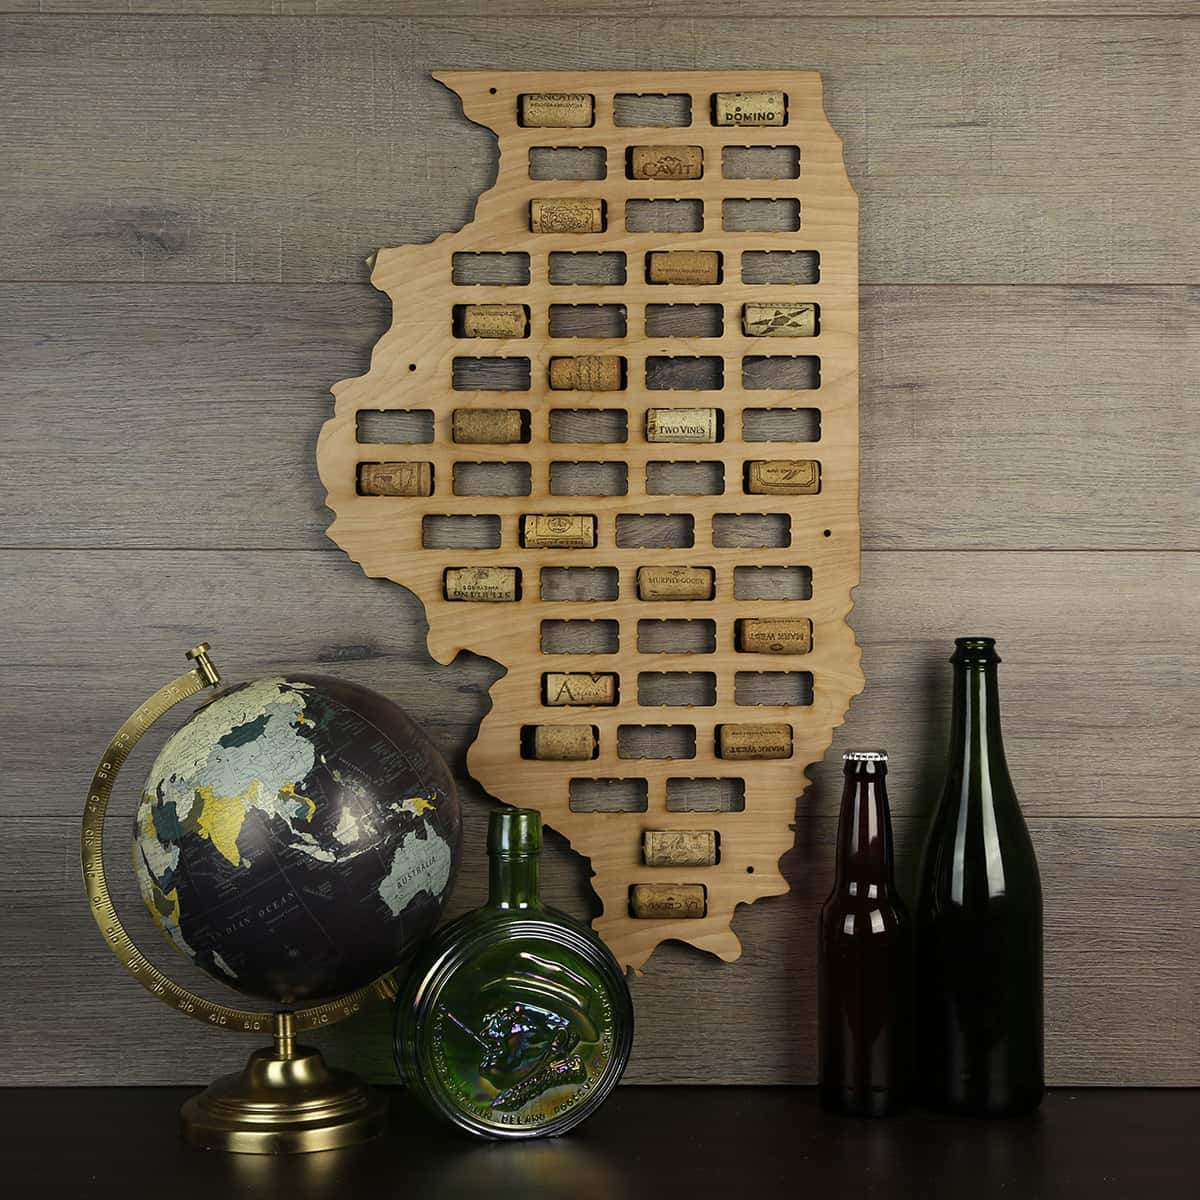 Torched Products Wine Cork Map Illinois Wine Cork Map (778968629365)